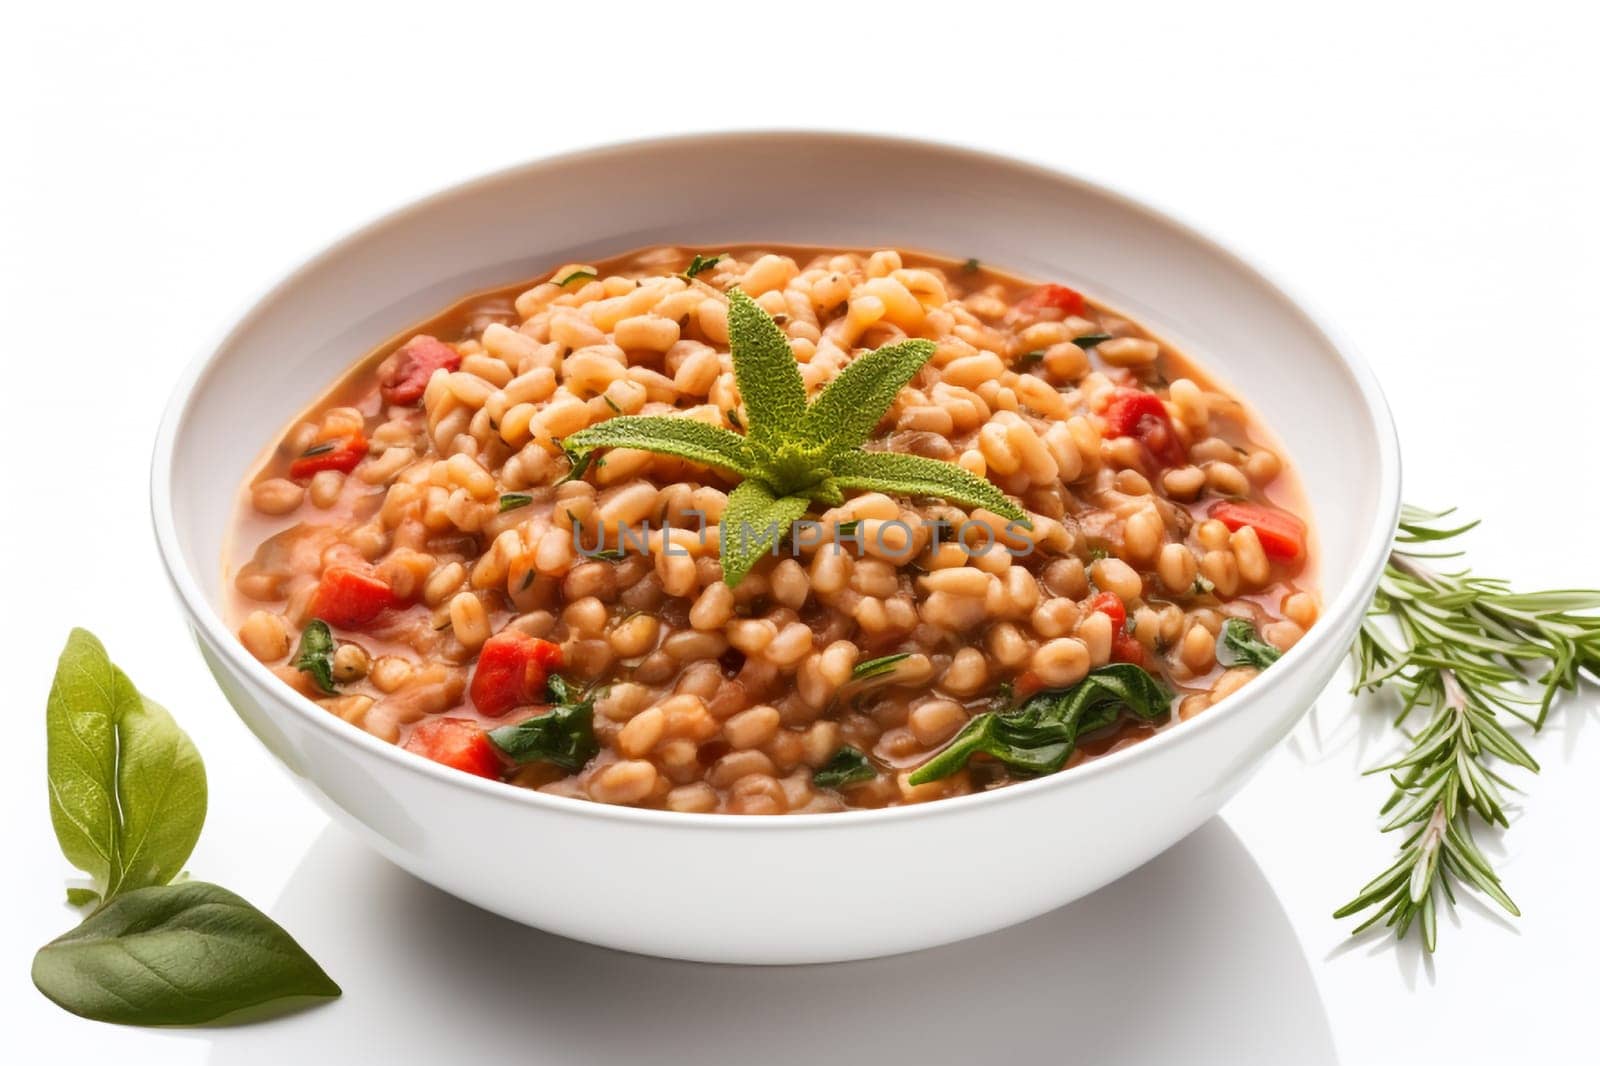 A warm embrace to the Italian culinary tradition with the rustic farro soup by Ciorba